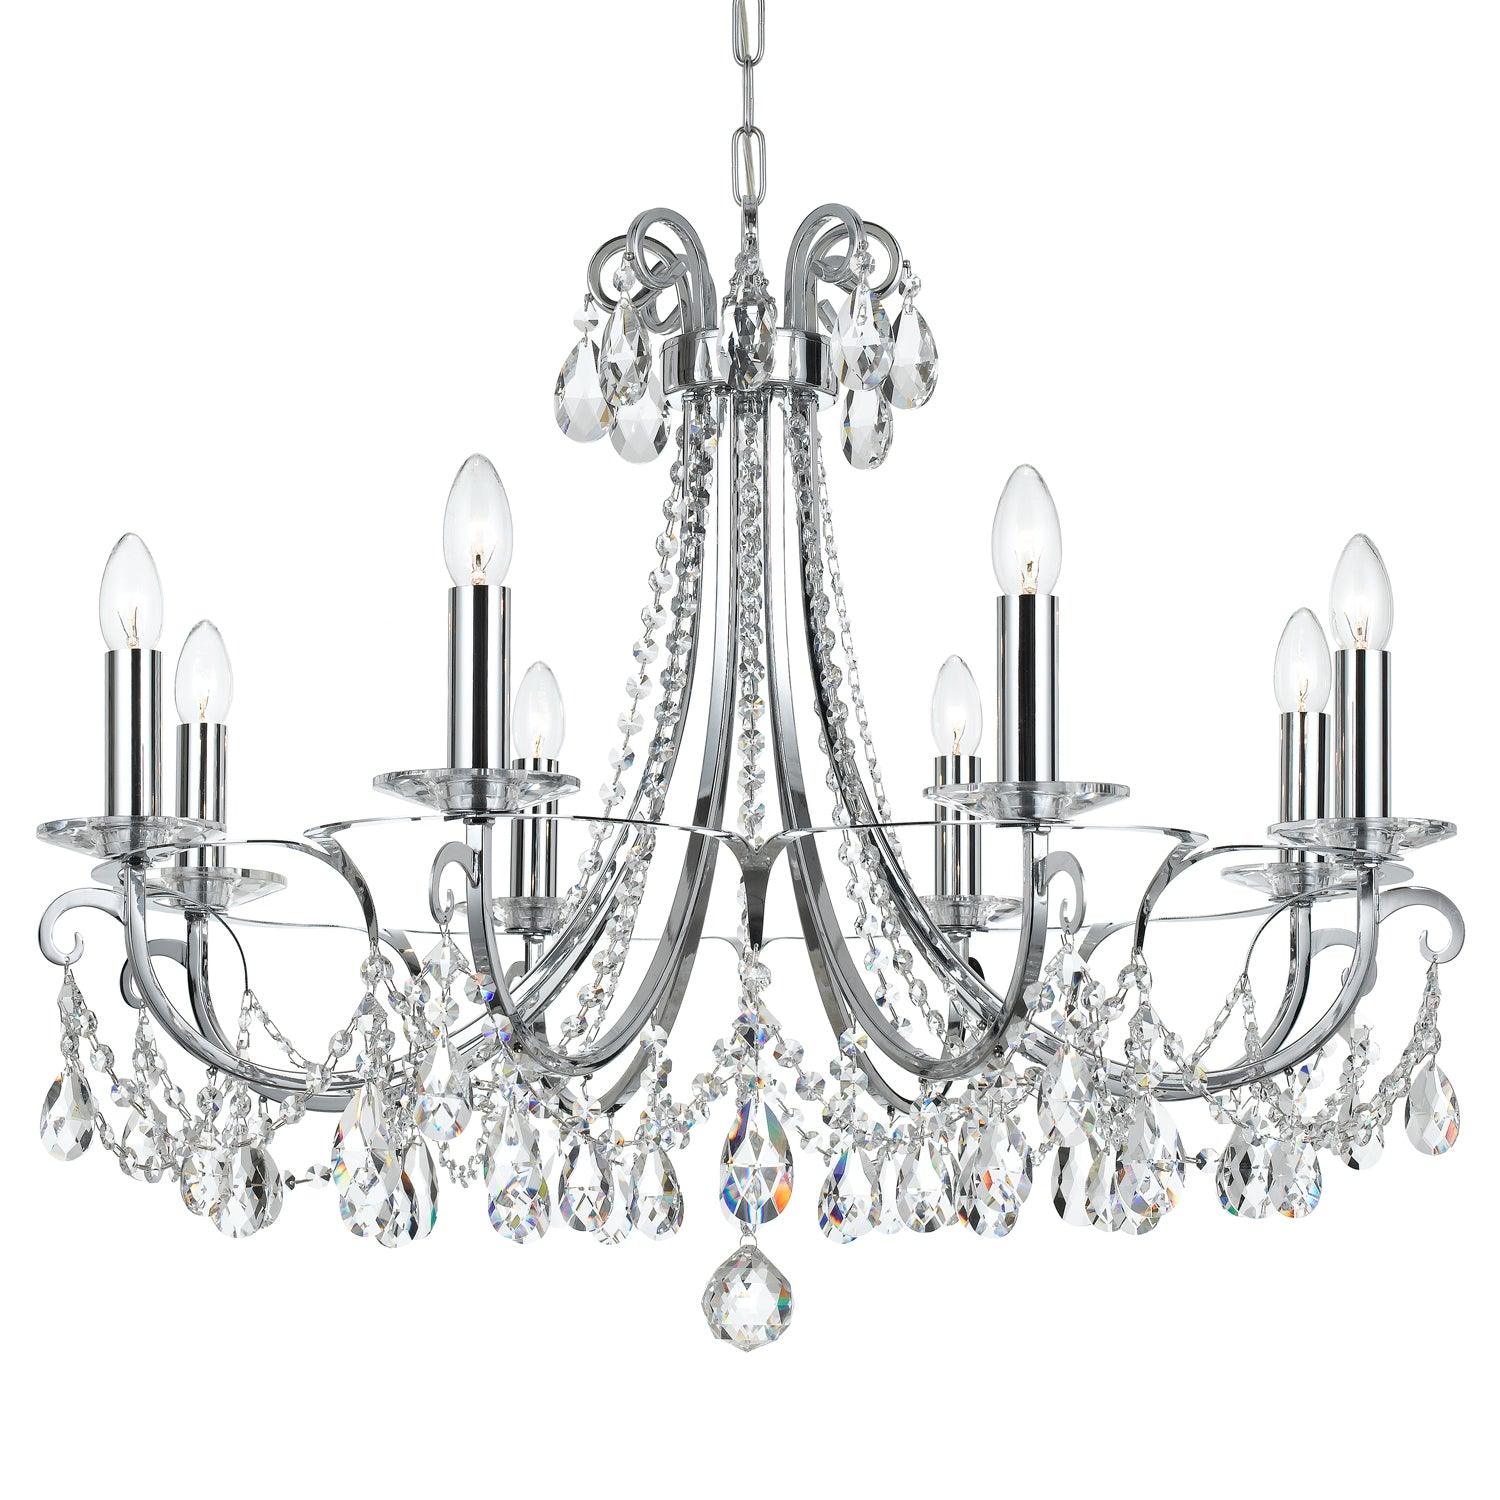 Crystorama - Othello Chandelier - 6828-CH-CL-MWP | Montreal Lighting & Hardware